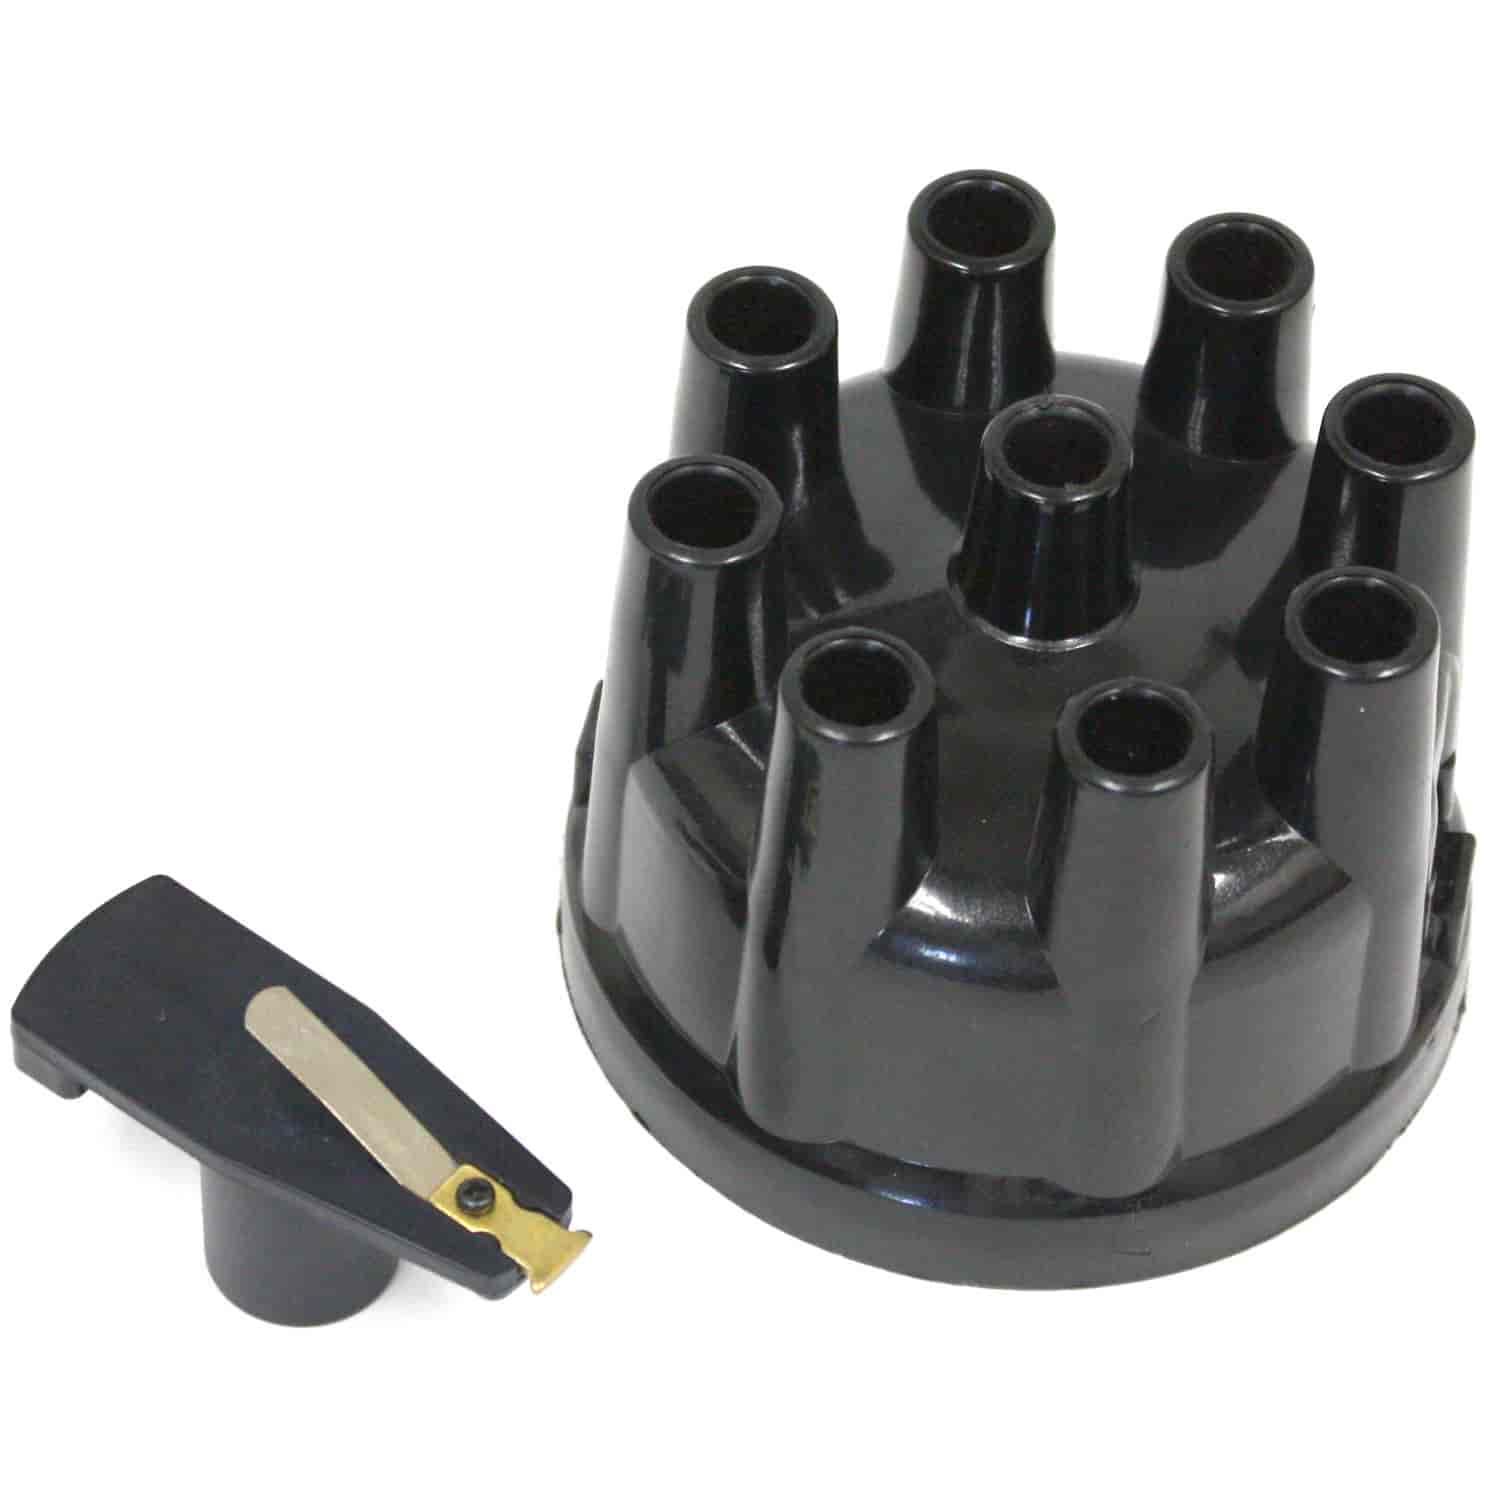 Flame Thrower Black Distributor Cap and Rotor Kit  for 8-Cylinder Ford Cast Distributor